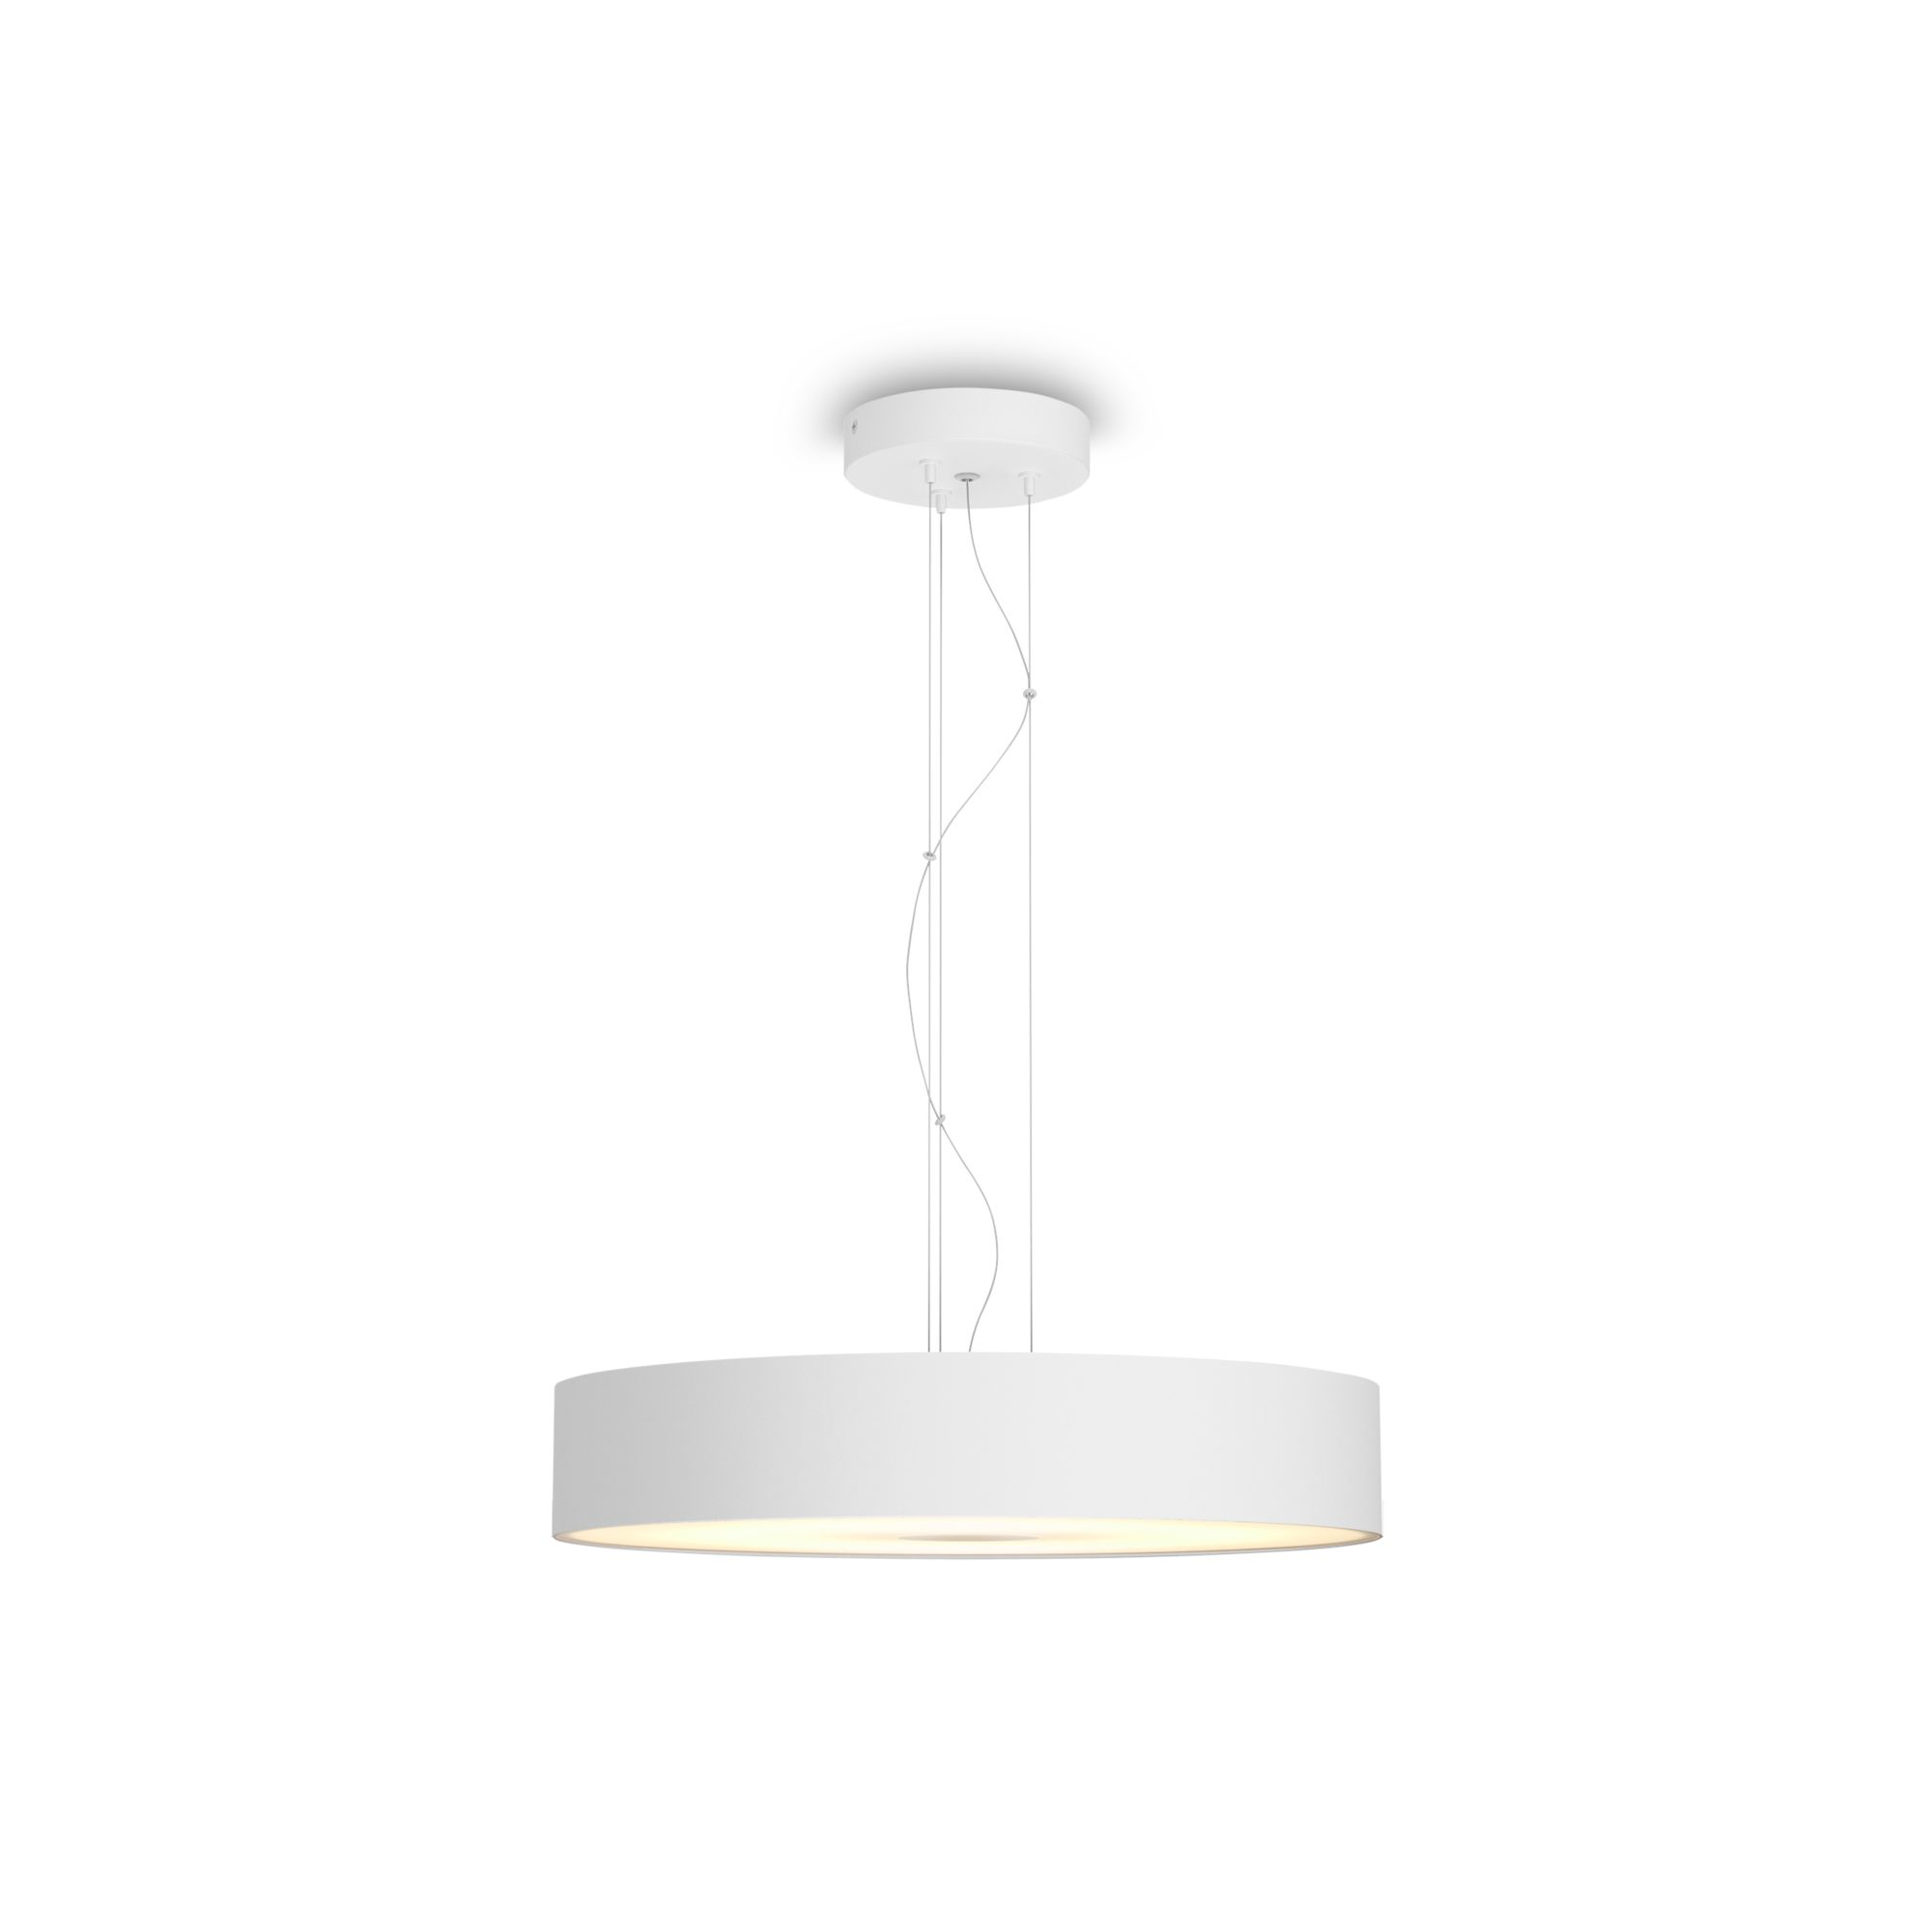 Philips by Signify Fair hanglamp